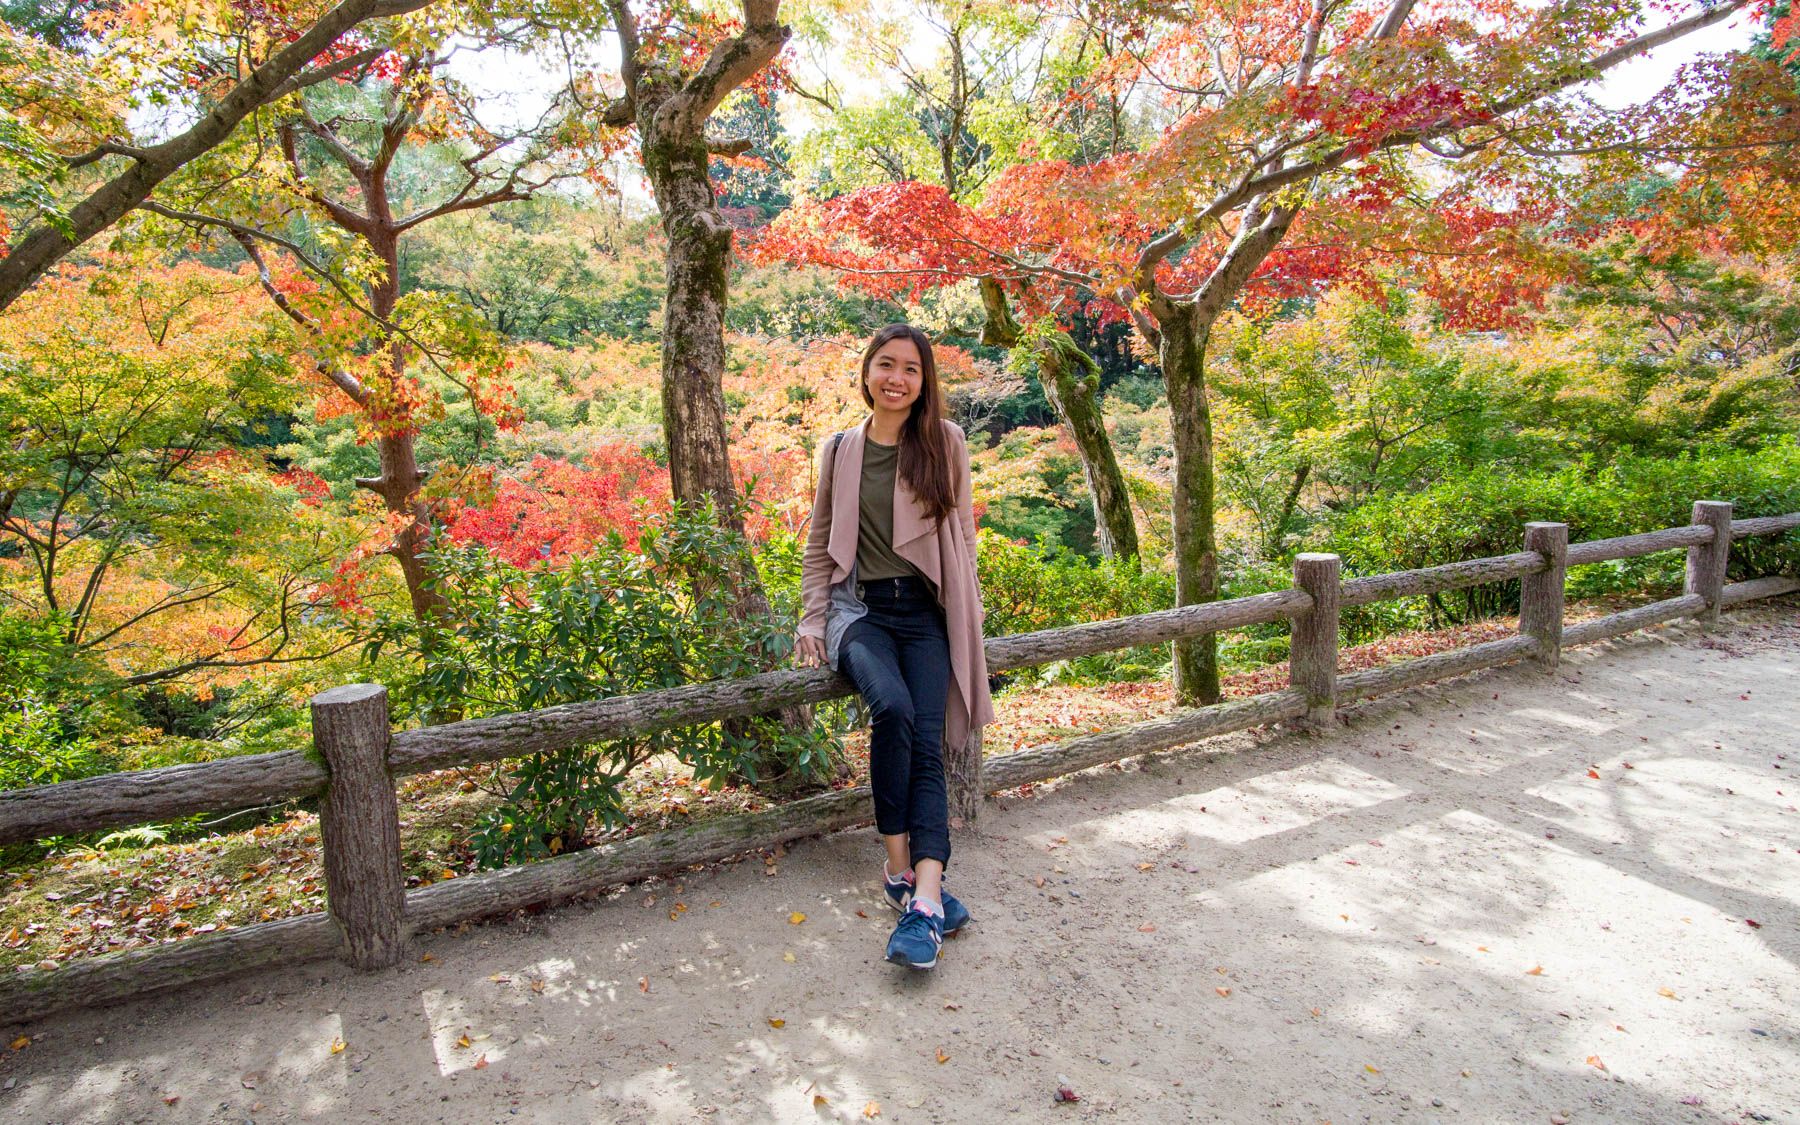 Me in Kyoto with beautiful autumn colors in the background